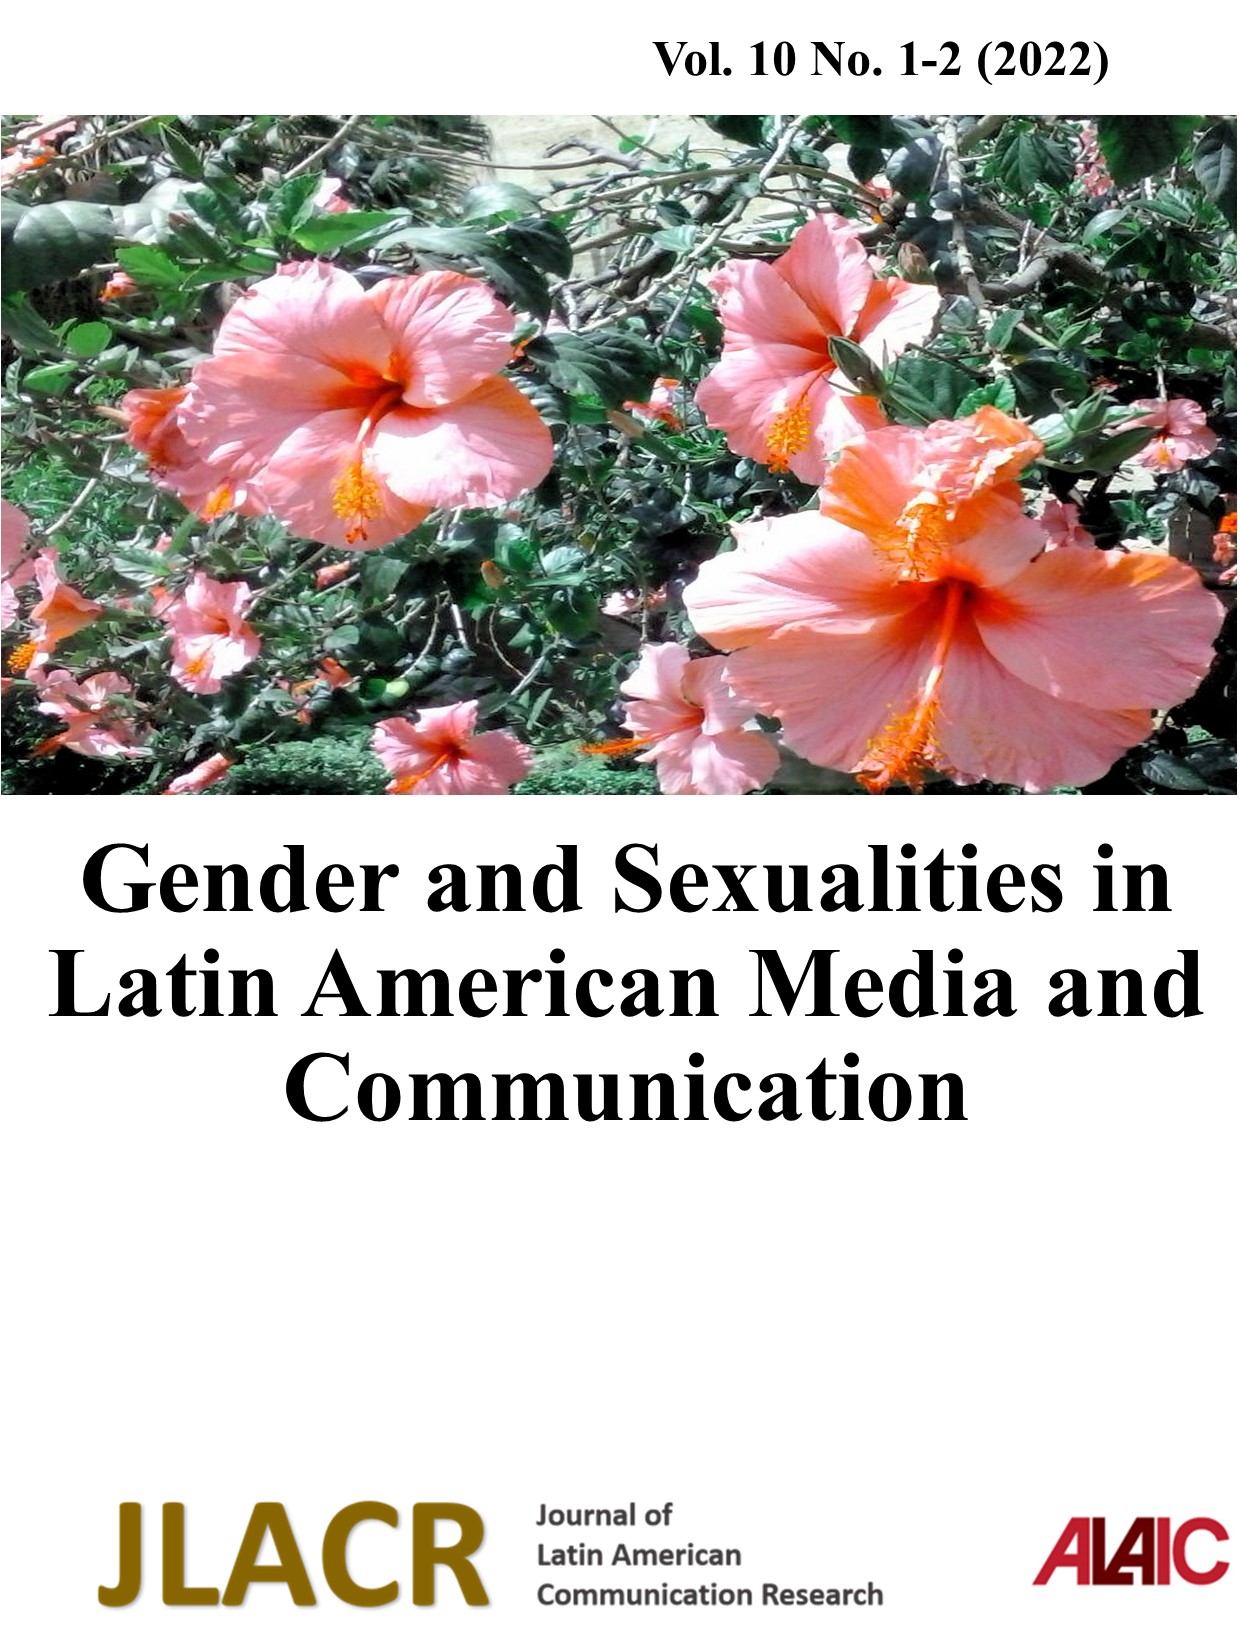 					Visualizar v. 10 n. 1-2 (2022): Gender and Sexualities in Latin American Media and Communication
				